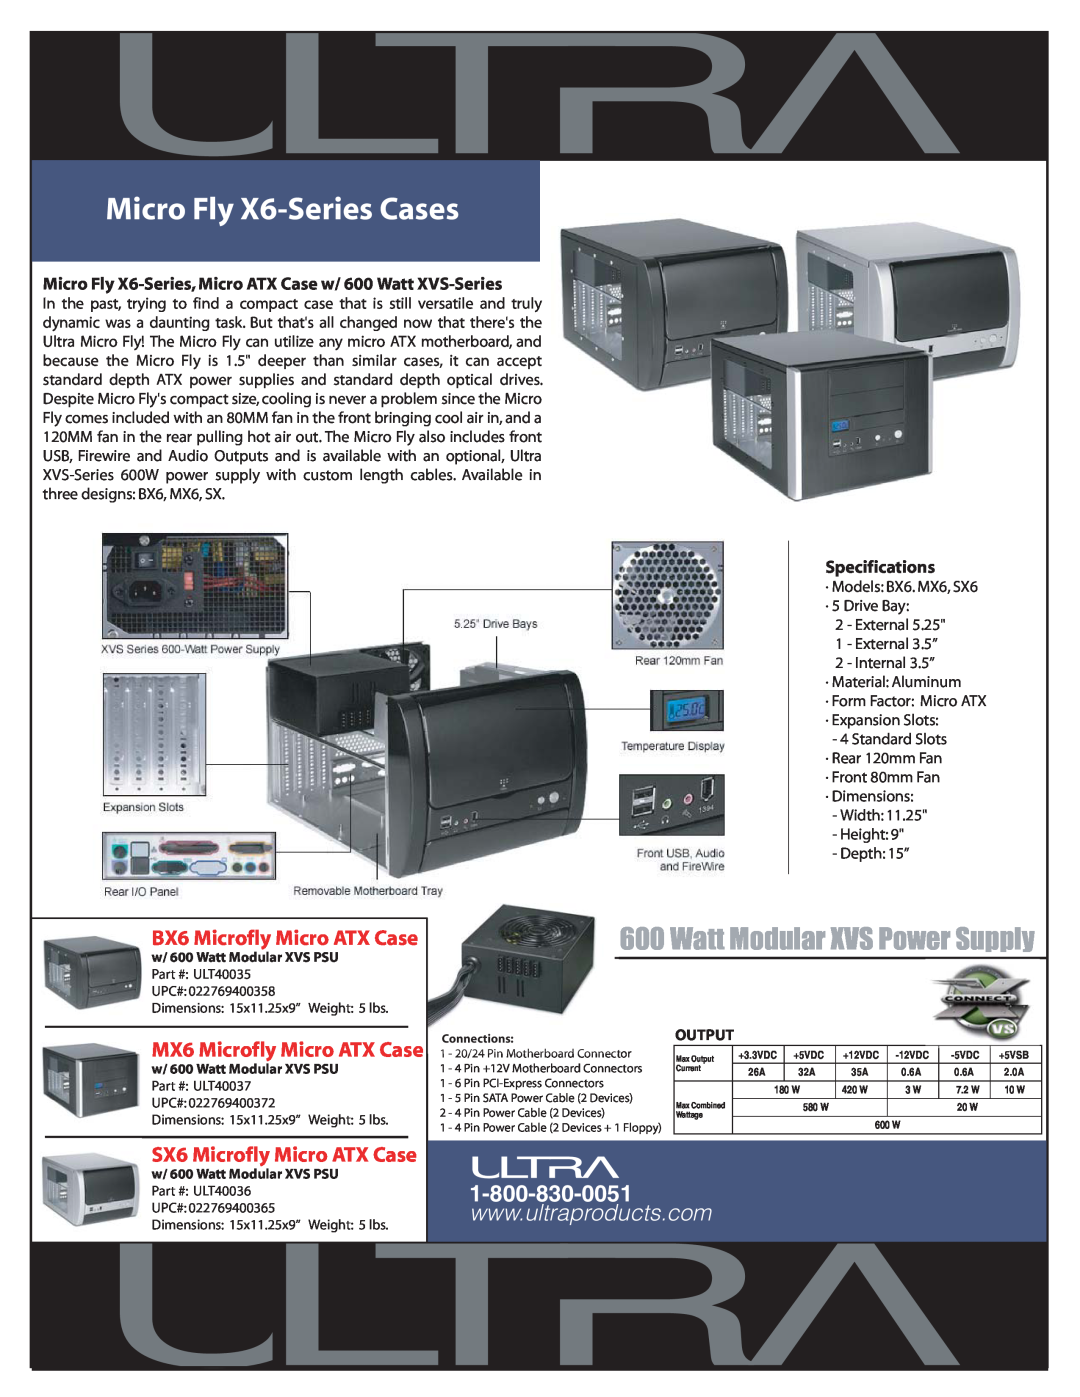 Ultra Products specifications Micro Fly X6-Series Cases, Watt Modular XVS Power Supply, BX6 Microfly Micro ATX Case 